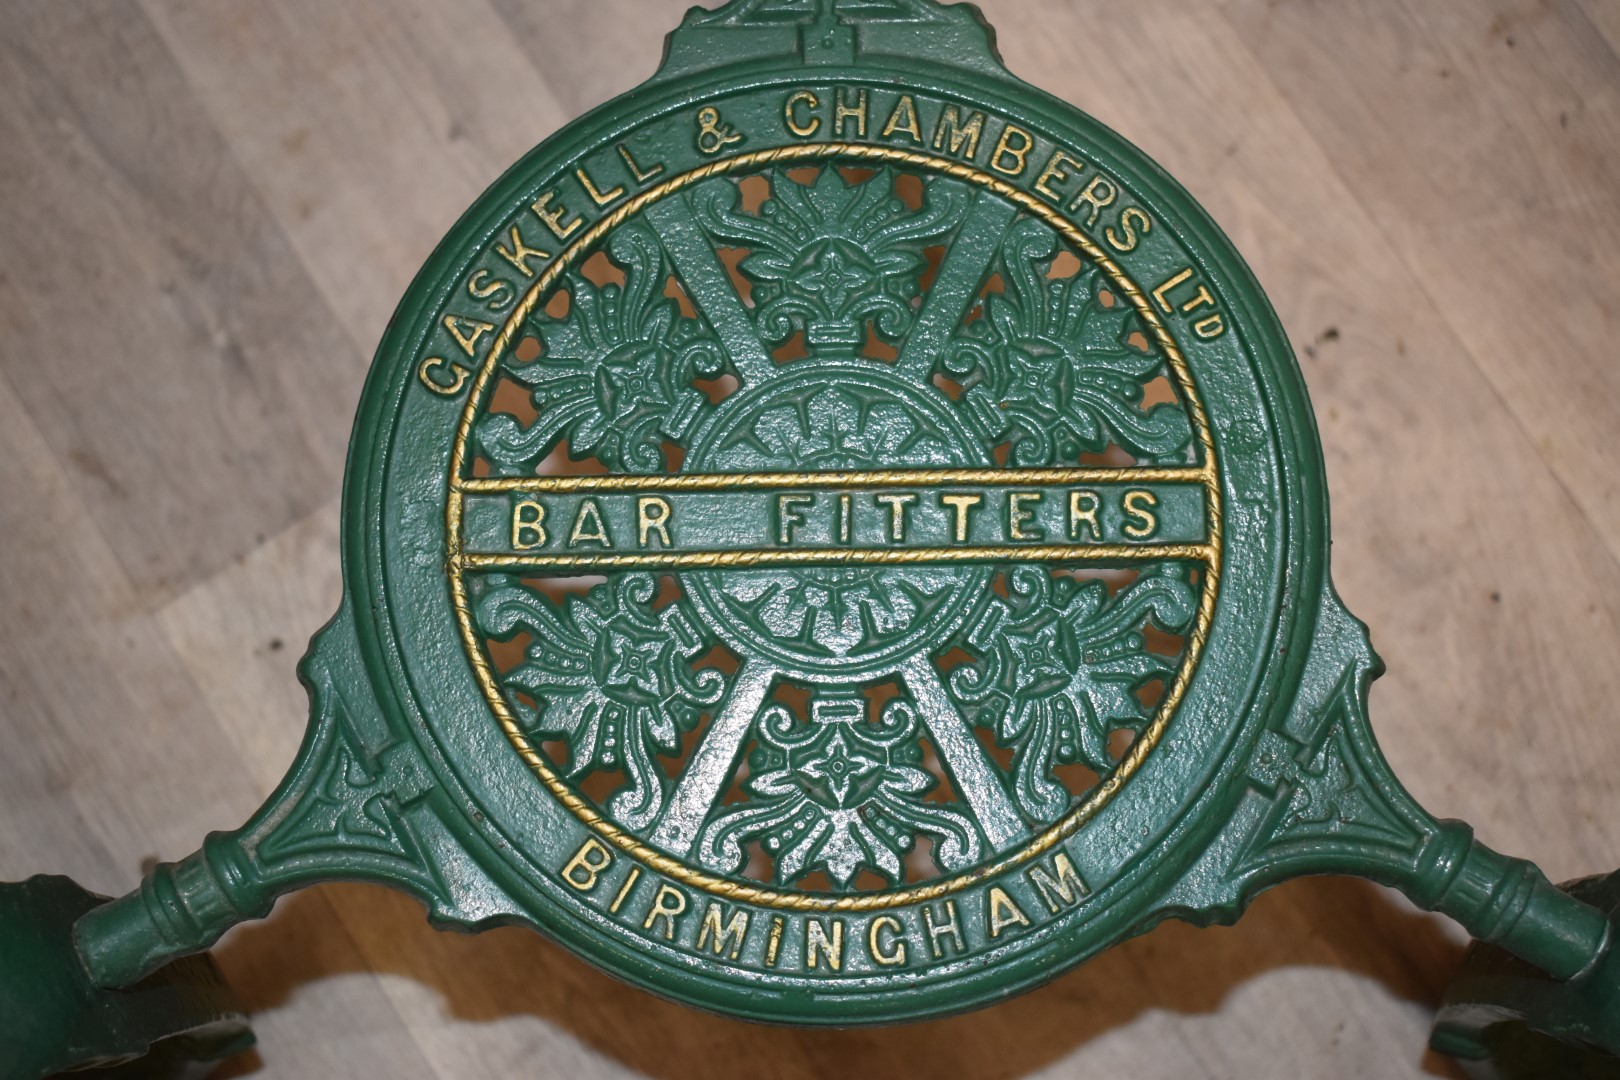 Cast iron pub table with marble top and Gaskell and Chambers, Bar Fitters, Birmingham to the - Image 3 of 3